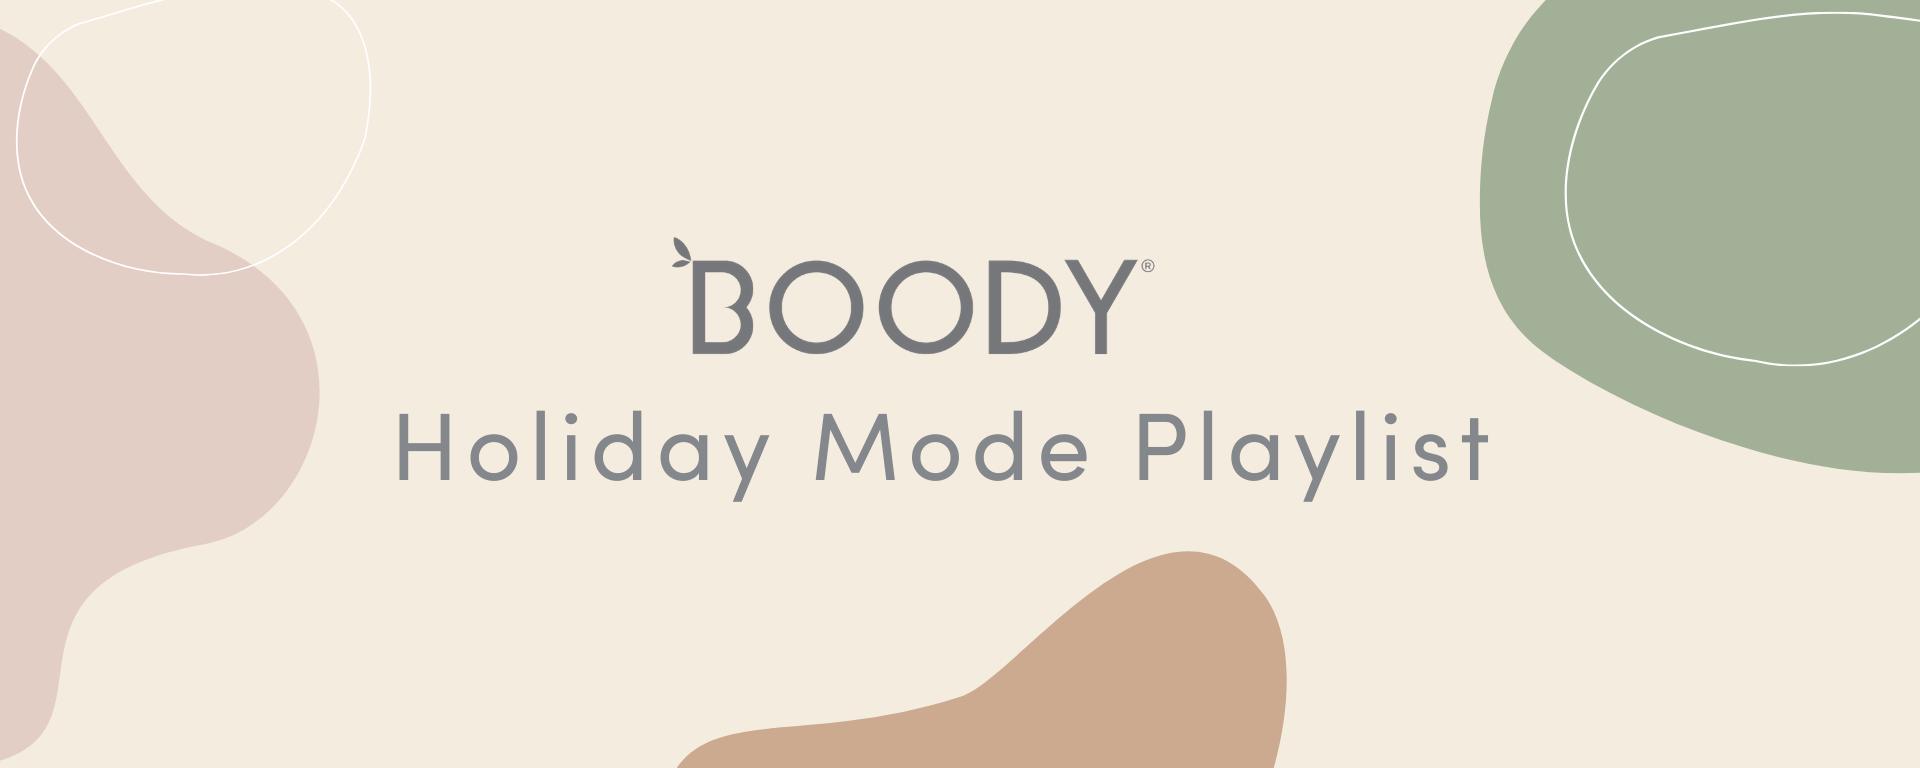 The Boody Holiday Mode Playlist